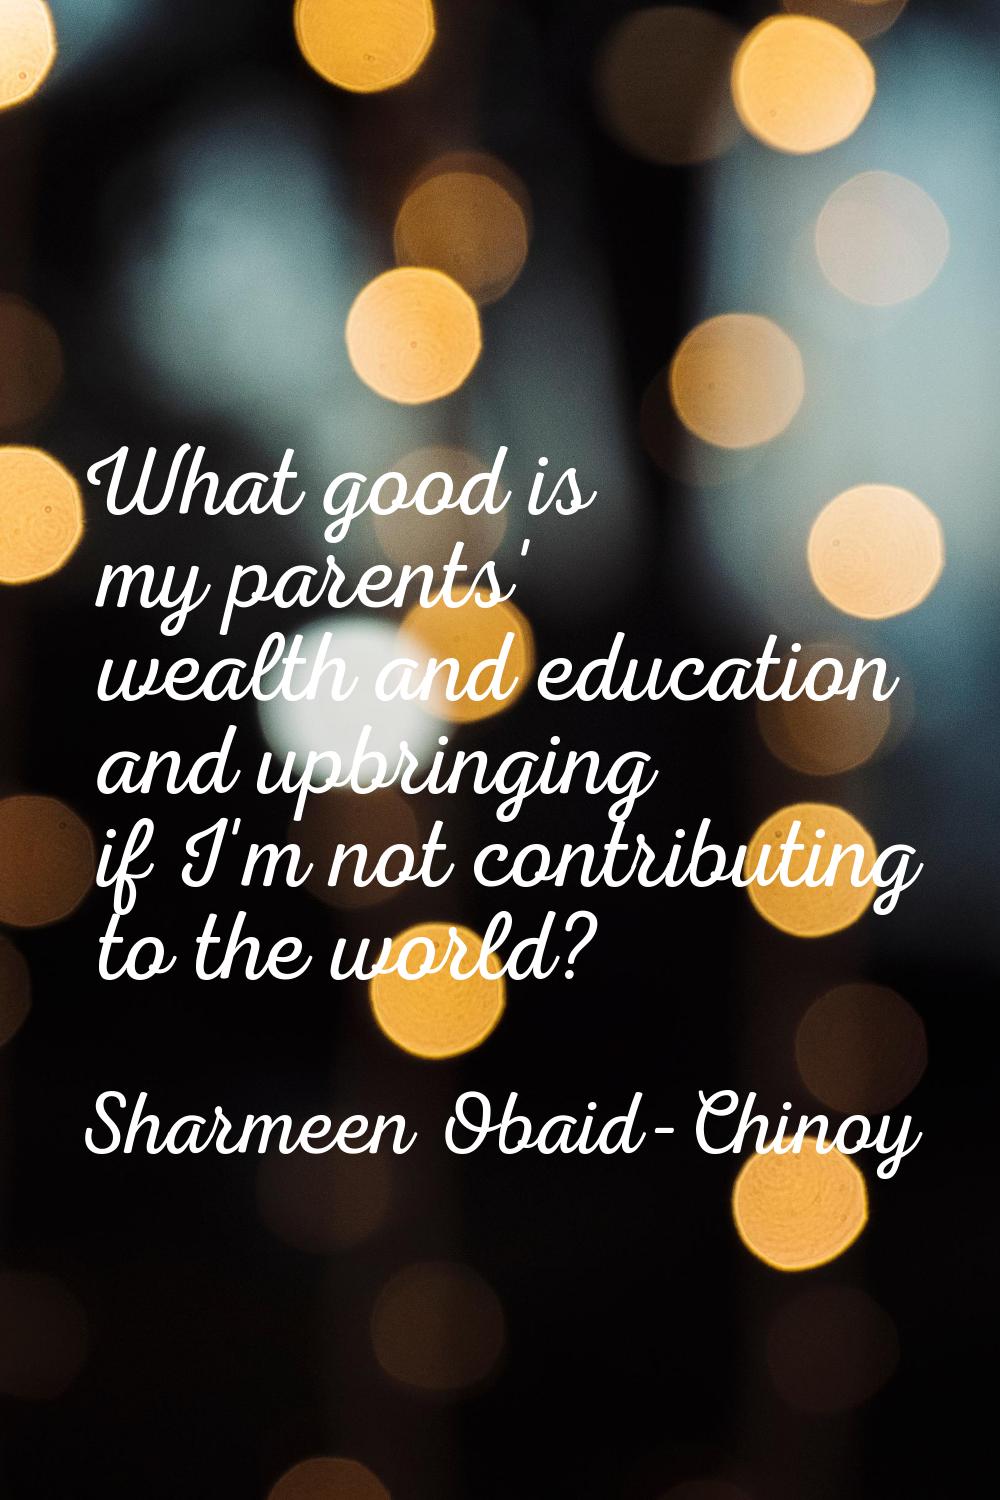 What good is my parents' wealth and education and upbringing if I'm not contributing to the world?